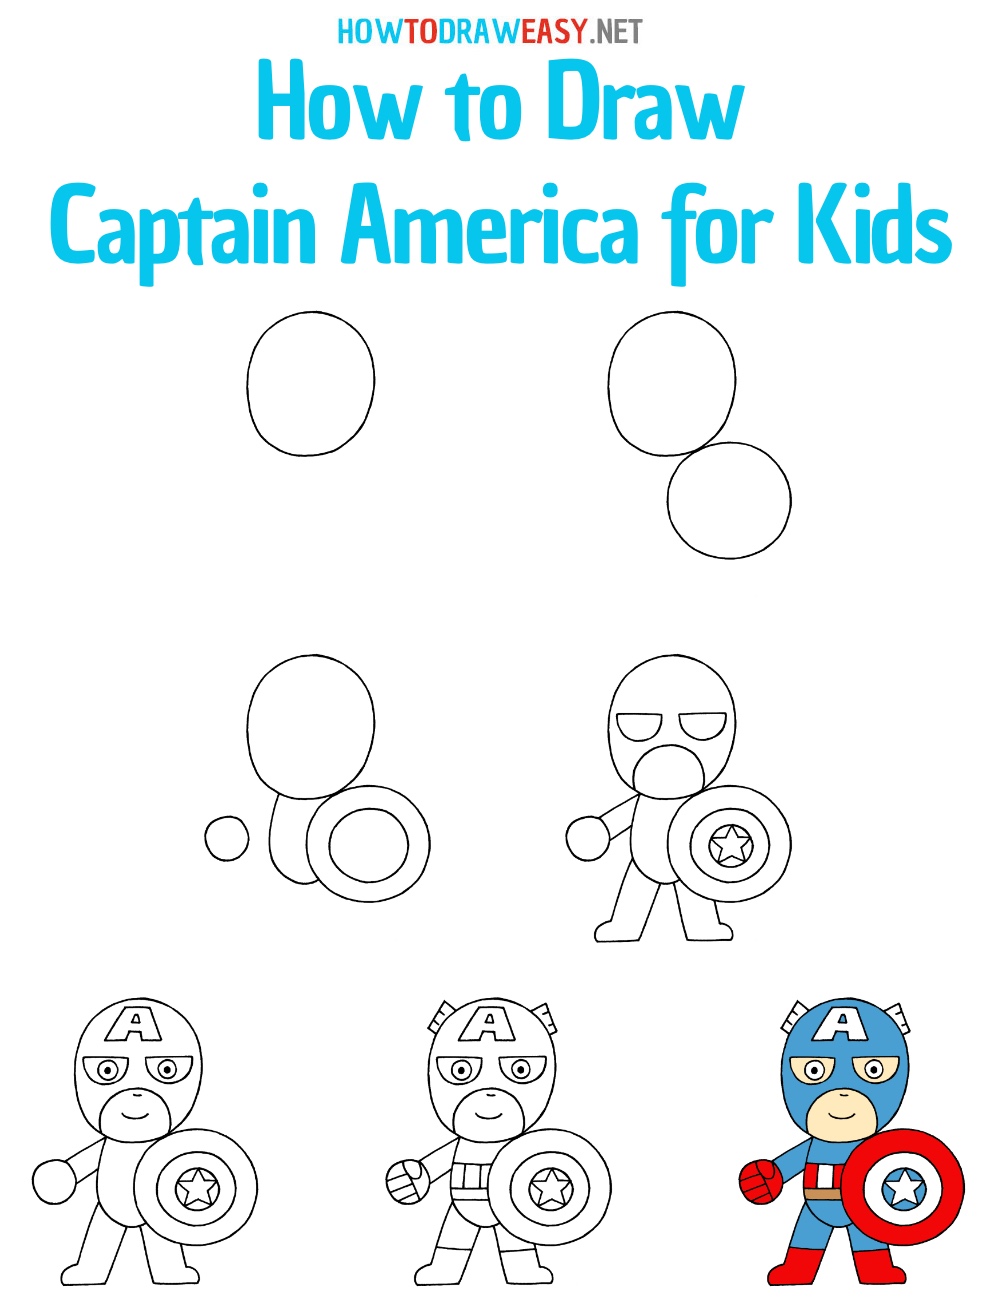 How to Draw Captain America for Kids Step by Step